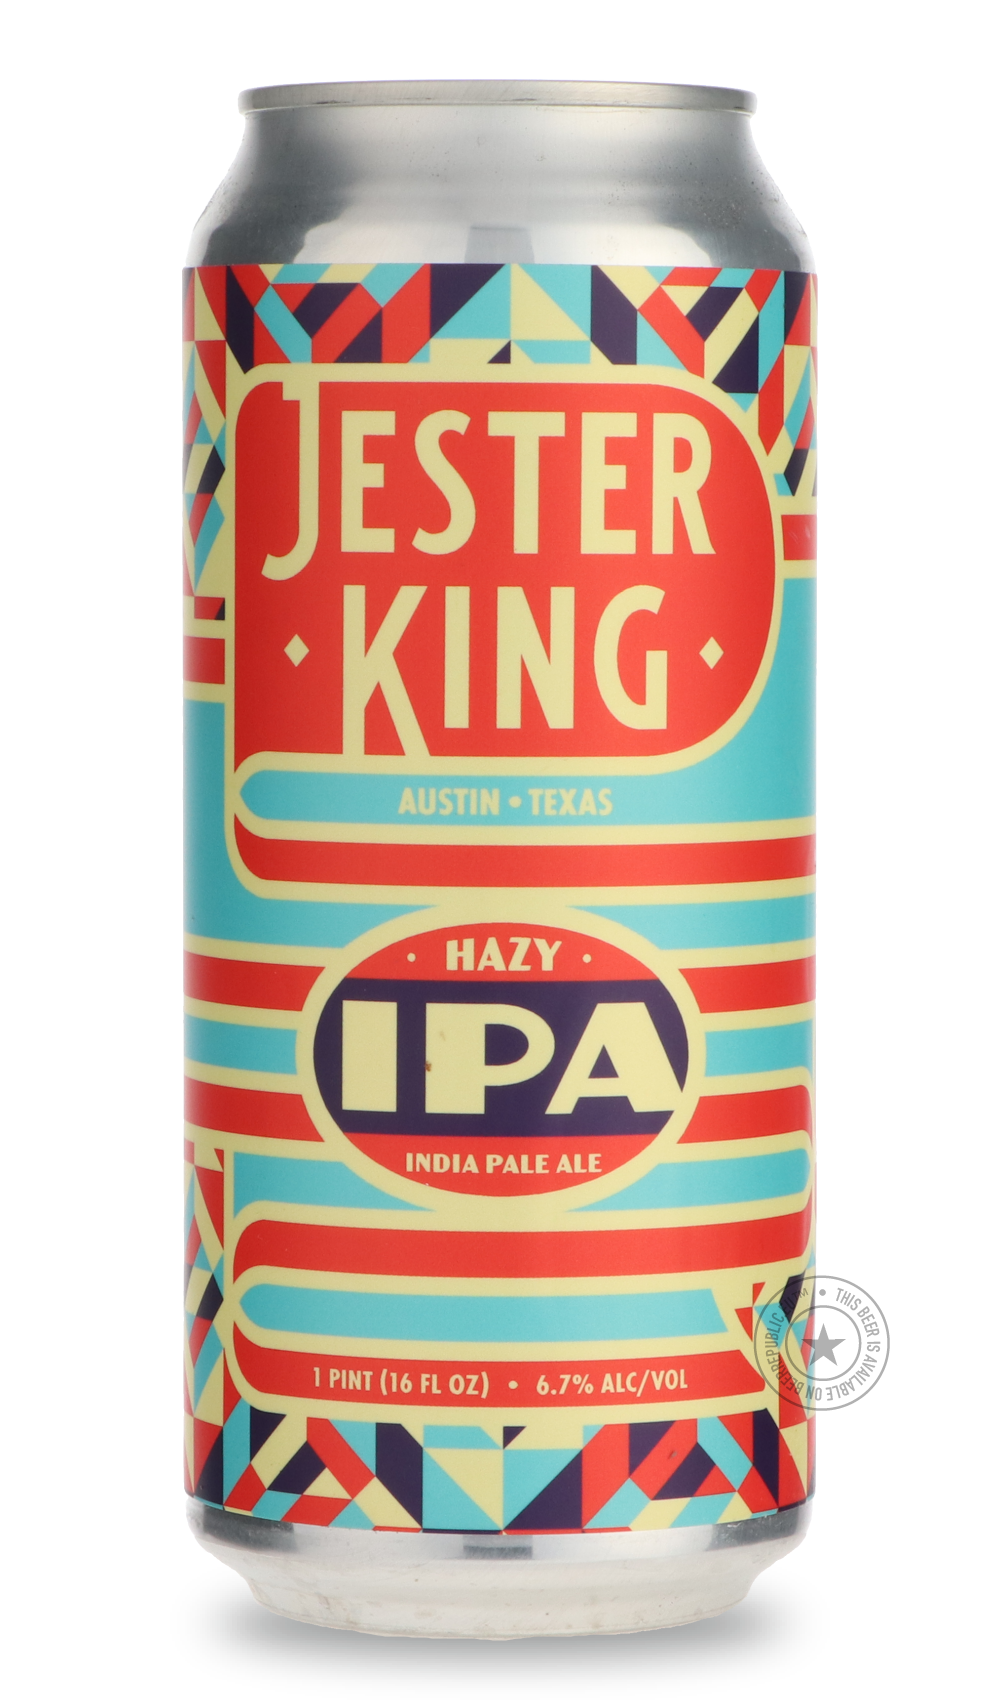 -Jester King- Hazy IPA-IPA- Only @ Beer Republic - The best online beer store for American & Canadian craft beer - Buy beer online from the USA and Canada - Bier online kopen - Amerikaans bier kopen - Craft beer store - Craft beer kopen - Amerikanisch bier kaufen - Bier online kaufen - Acheter biere online - IPA - Stout - Porter - New England IPA - Hazy IPA - Imperial Stout - Barrel Aged - Barrel Aged Imperial Stout - Brown - Dark beer - Blond - Blonde - Pilsner - Lager - Wheat - Weizen - Amber - Barley Win